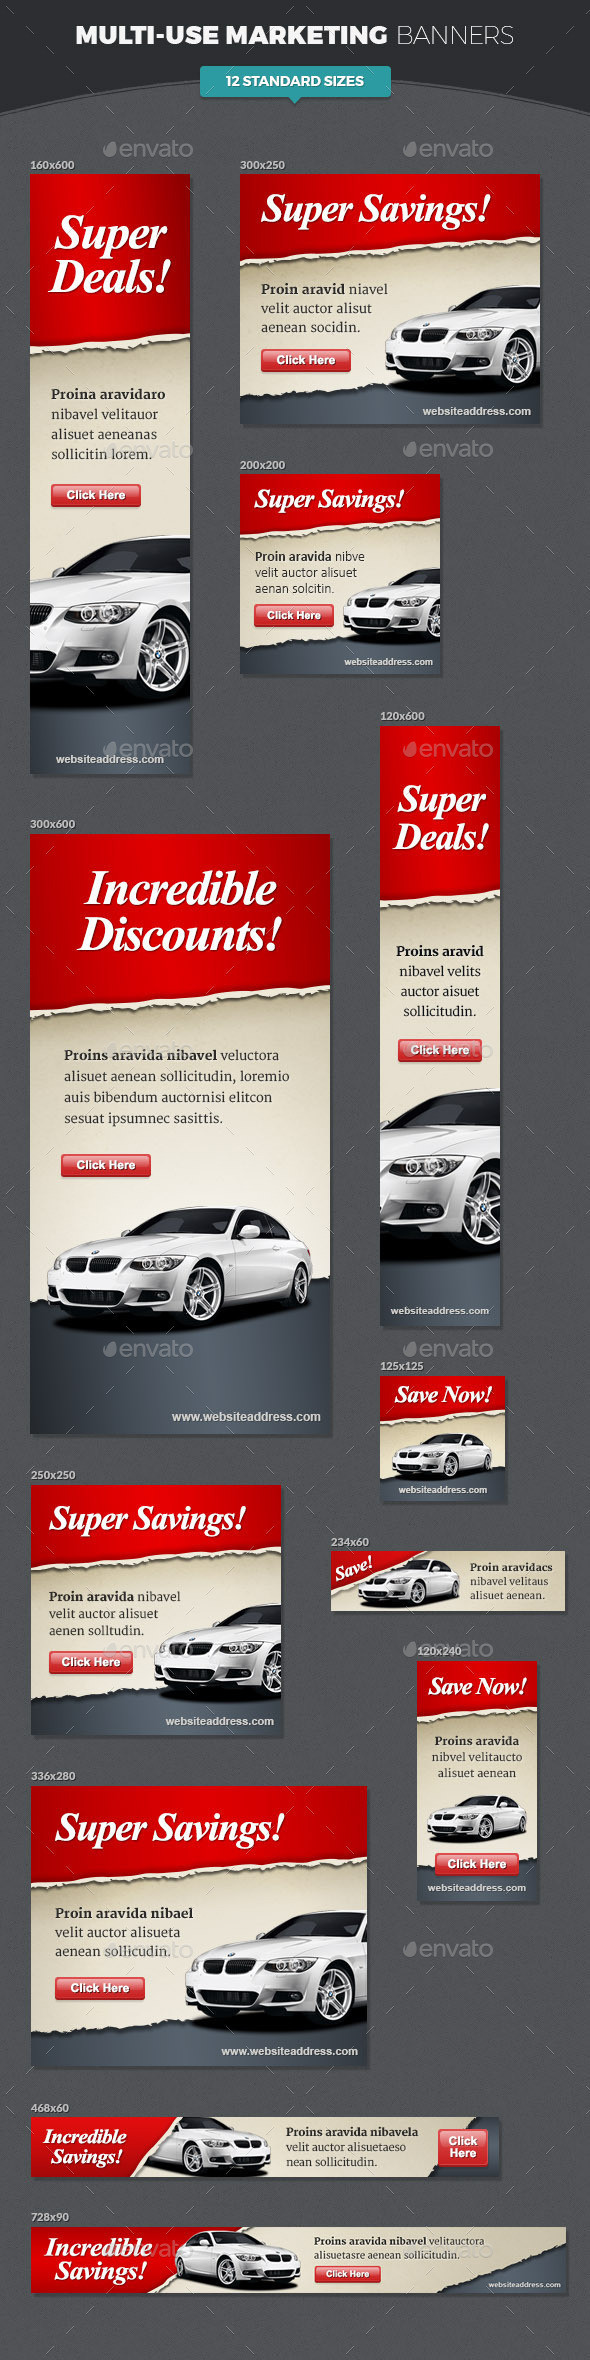 Preview multi use marketing banners